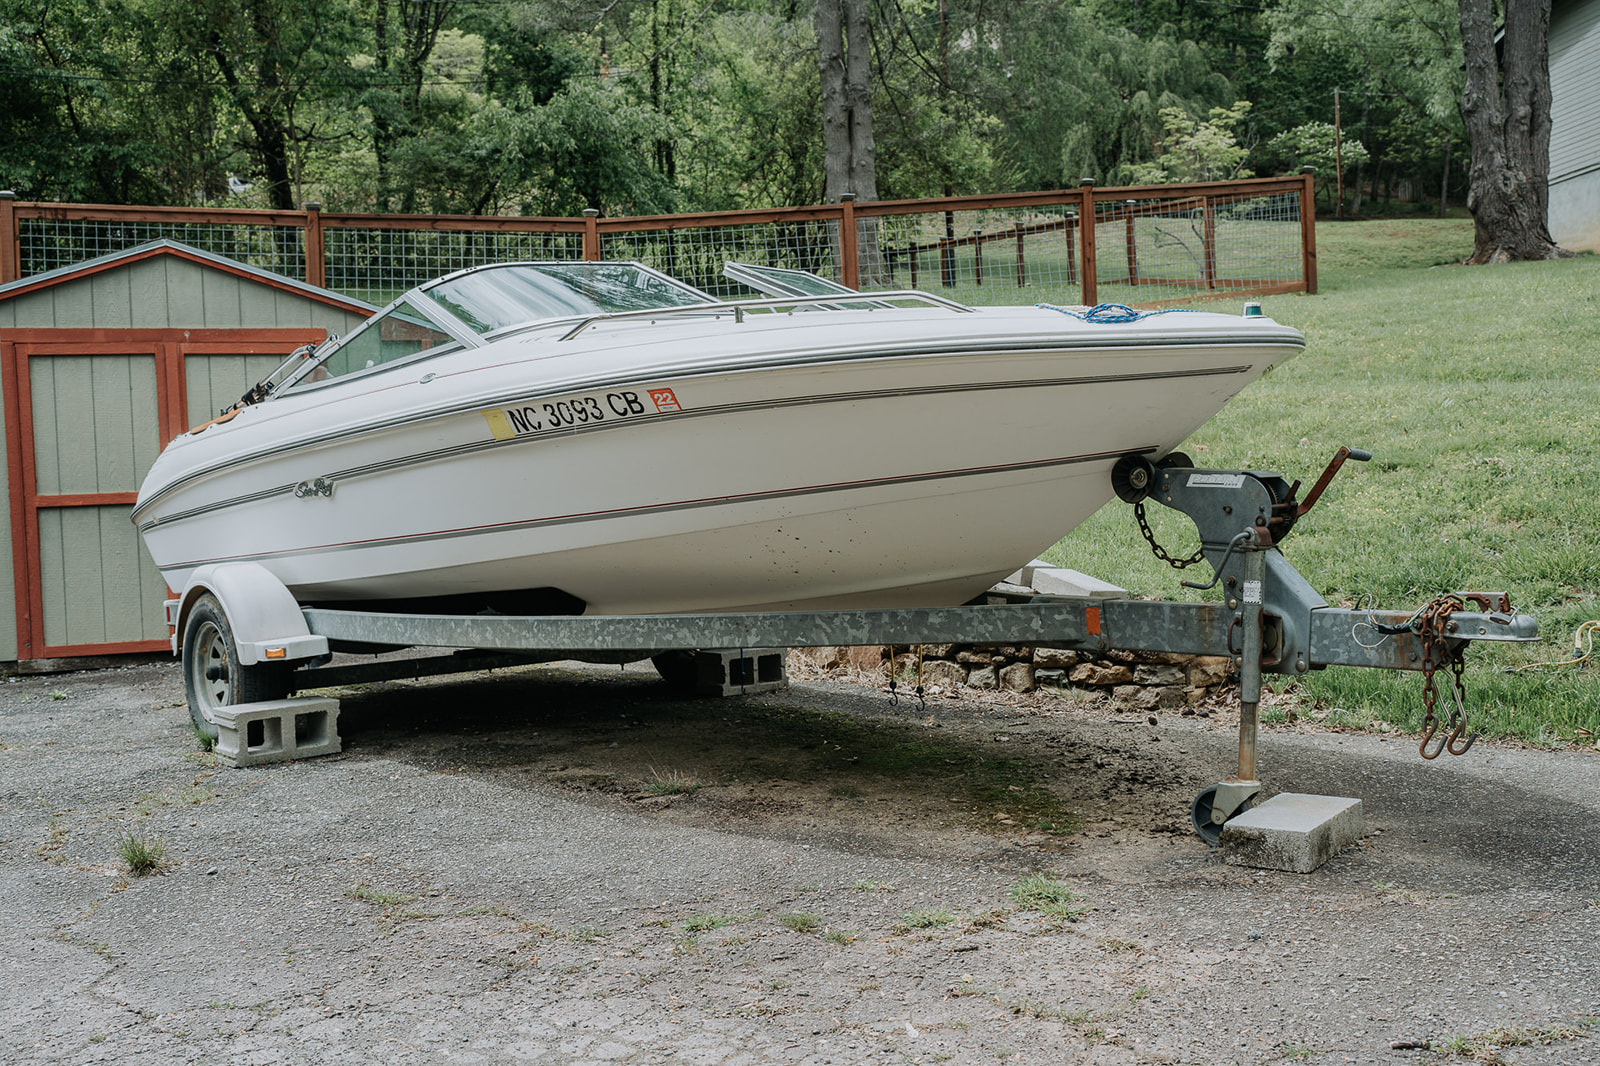 1991 Sea Ray 170 Bowrider Power boat for sale in Asheville, NC - image 4 